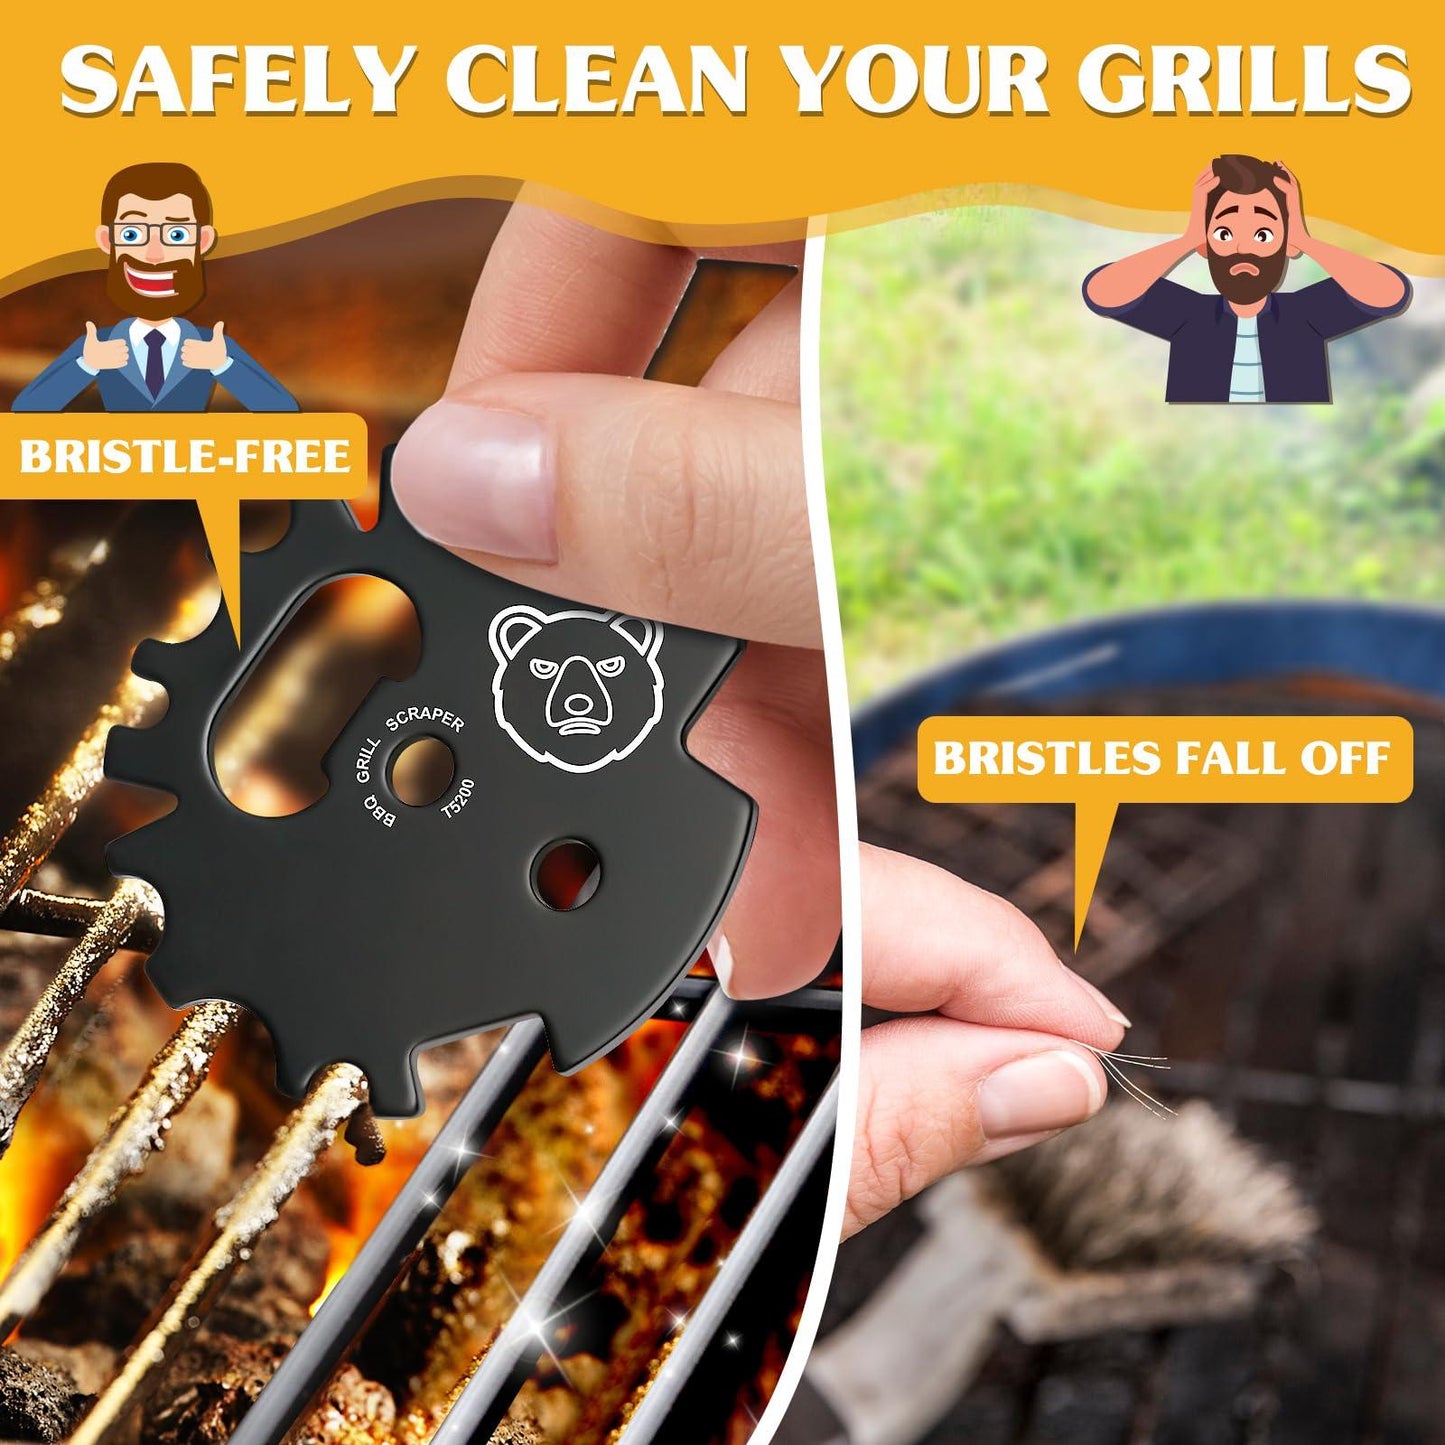 Grill Scraper Stocking Stuffers for Women Men: BBQ Gifts for Men Adults Teens Cool Kitchen Gadgets Smoker Accessories Outdoor Grate Grilling Cleaning Tools Unique Christmas Camping Cooking Gifts Ideas - CookCave